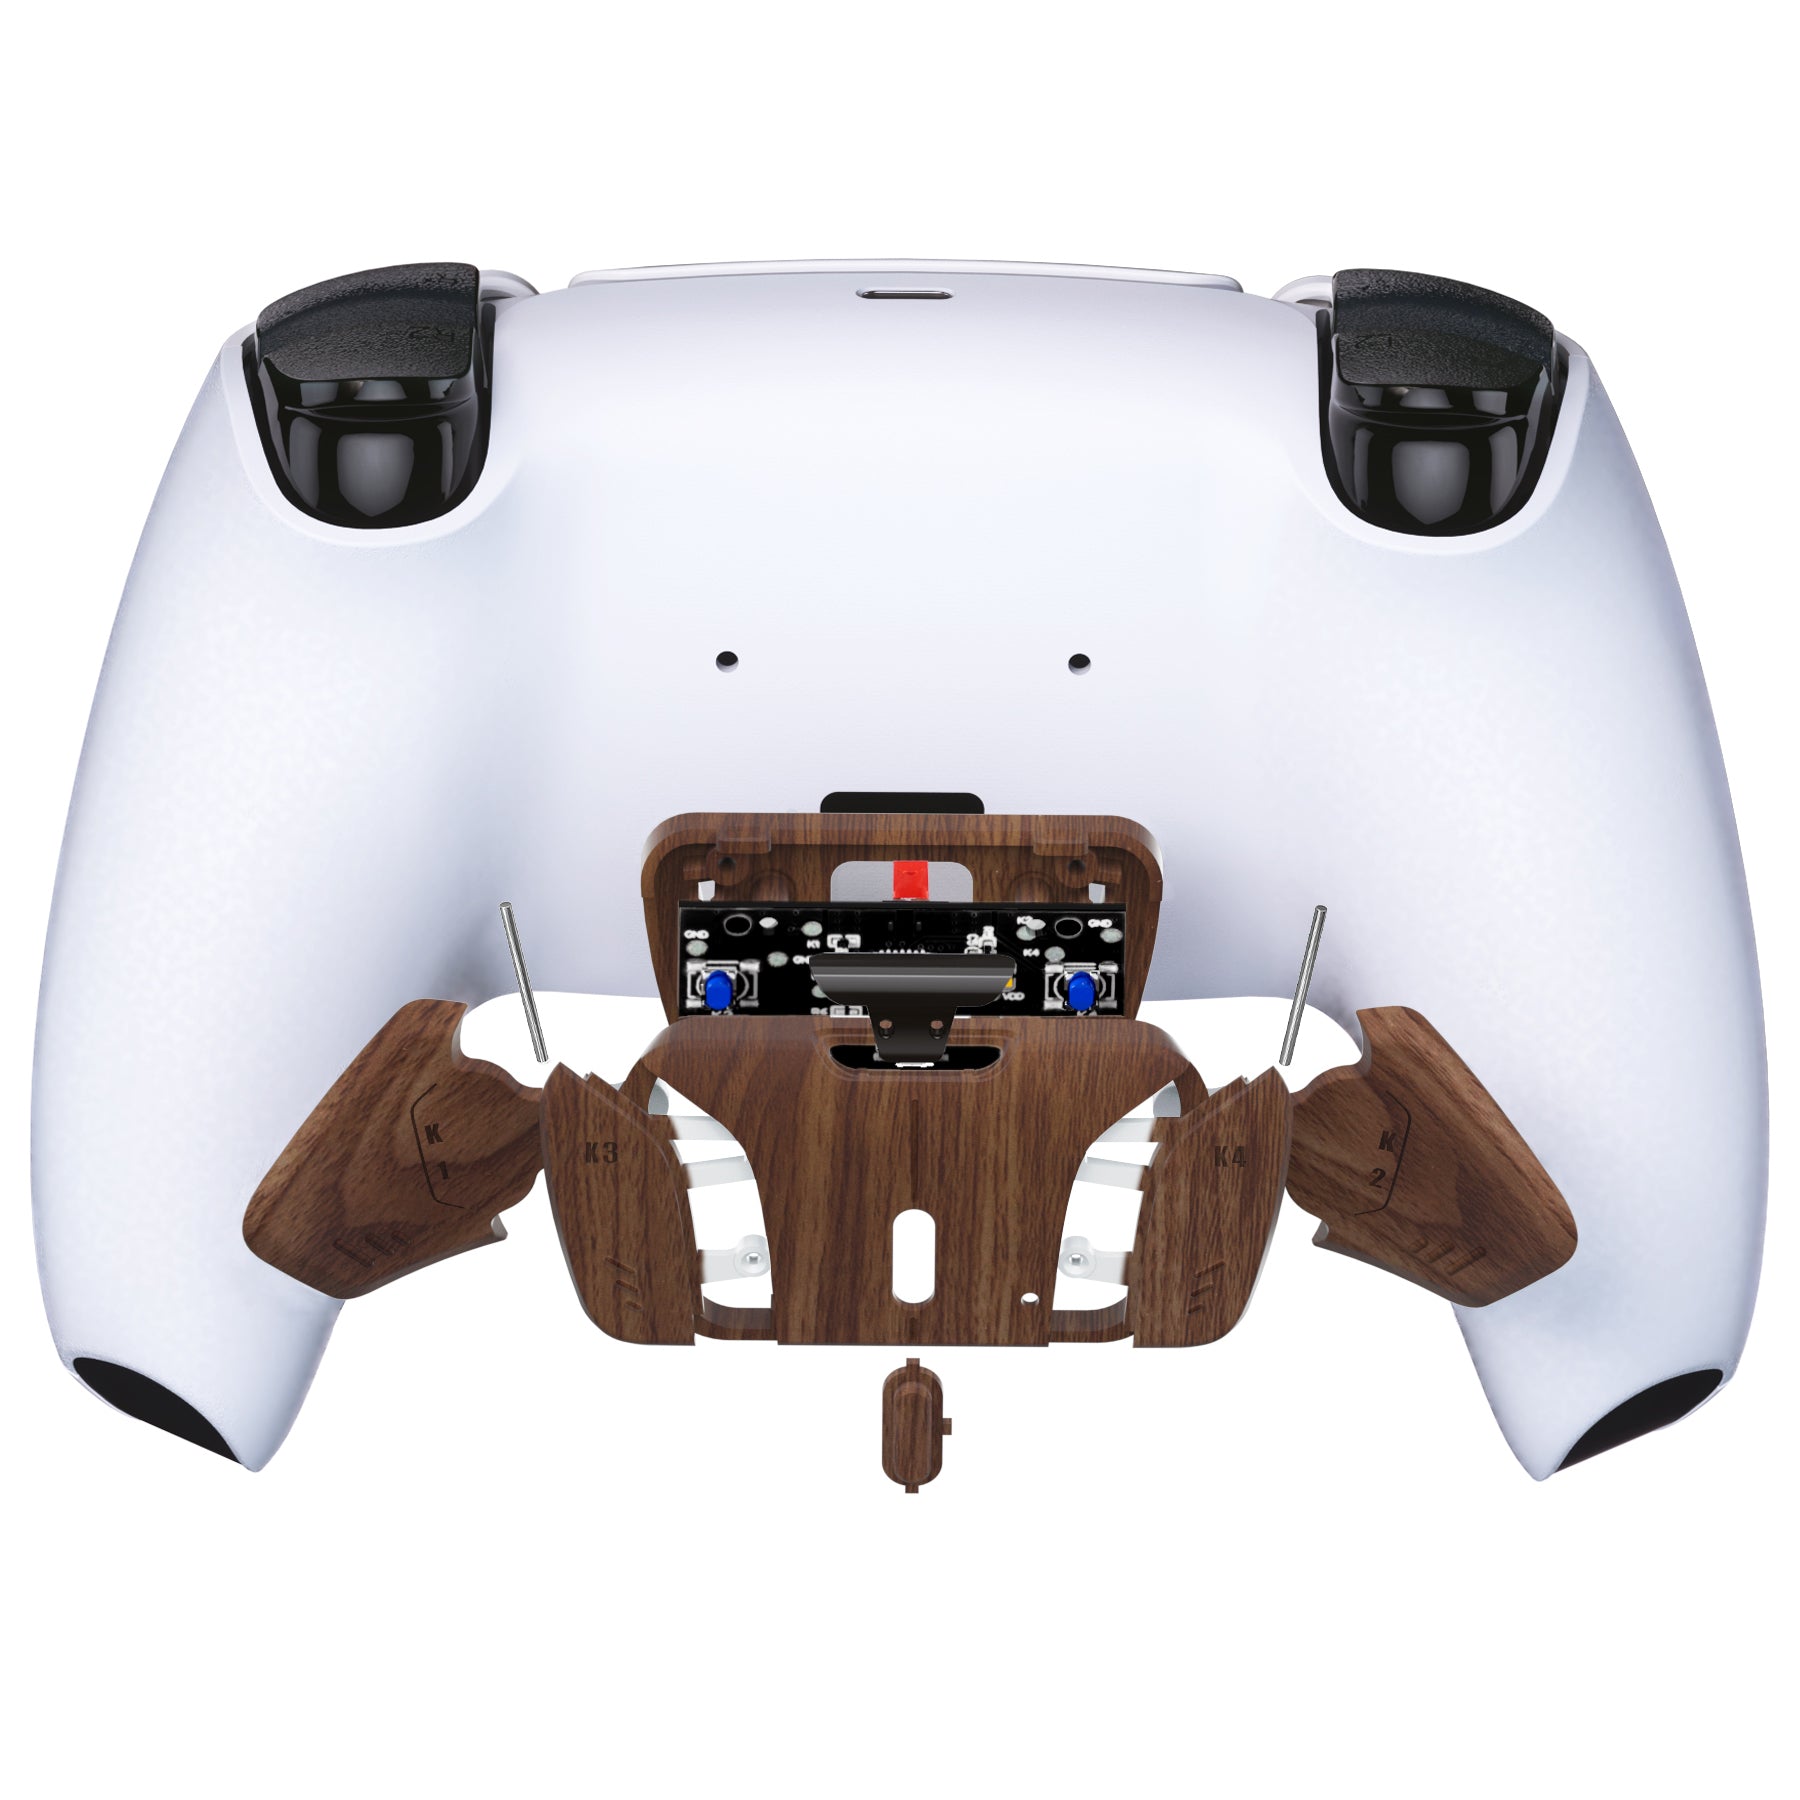 eXtremeRate Turn RISE to RISE4 Kit – Redesigned K1 K2 K3 K4 Back Buttons Housing & Remap PCB Board for eXtremeRate RISE & RISE4 Remap kit, Compatible with PS5 Controller - Wood Grain eXtremeRate